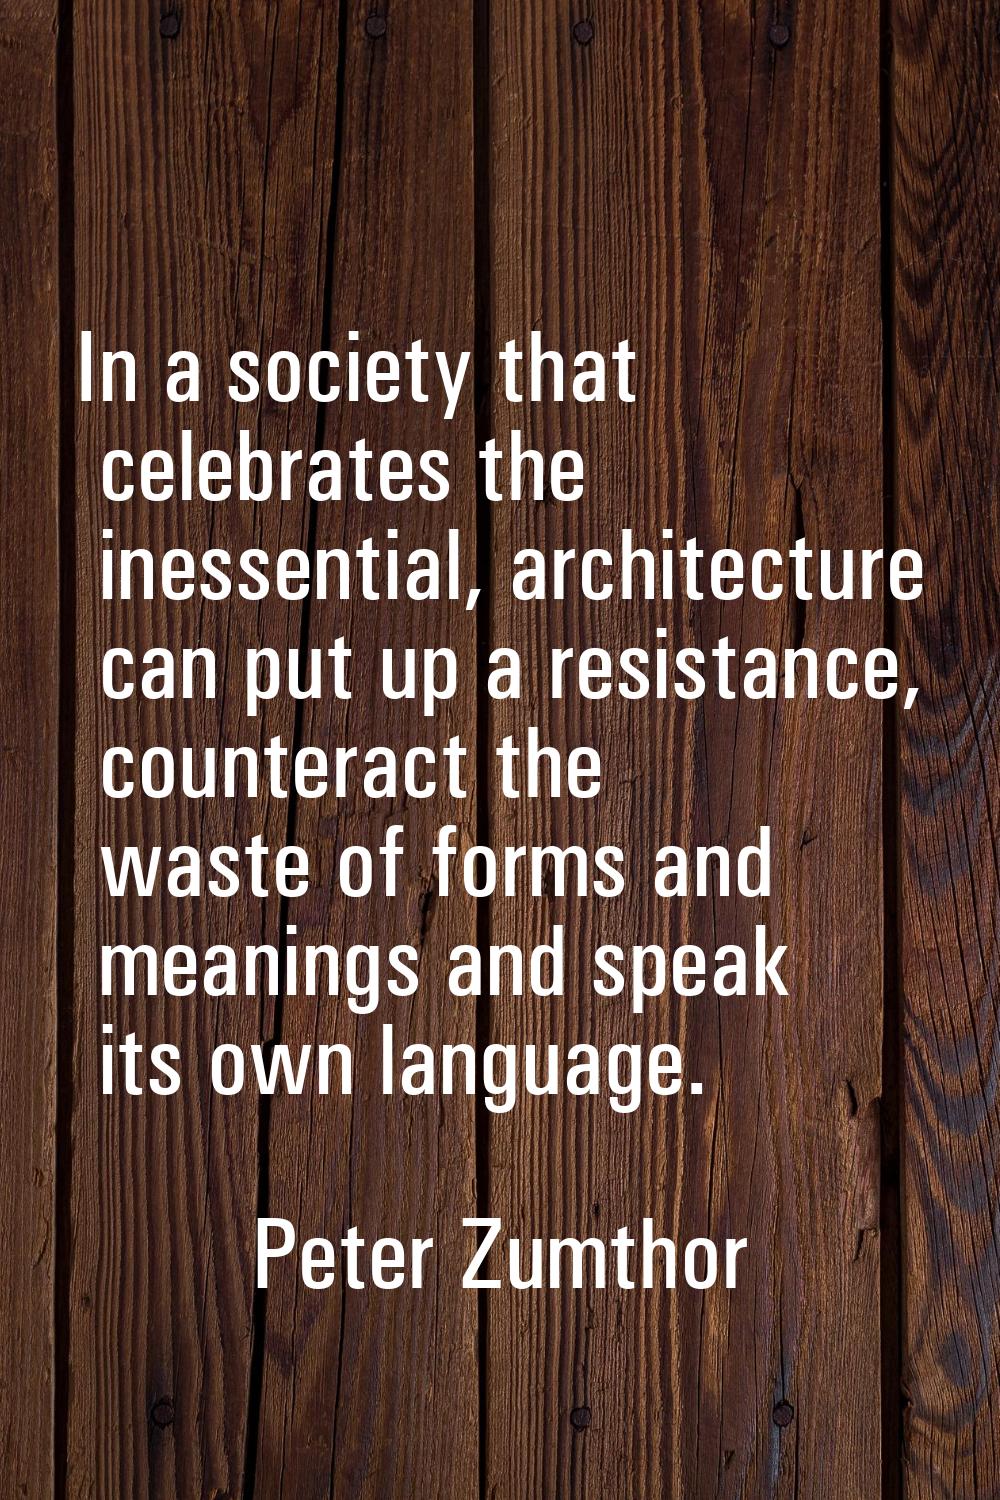 In a society that celebrates the inessential, architecture can put up a resistance, counteract the 